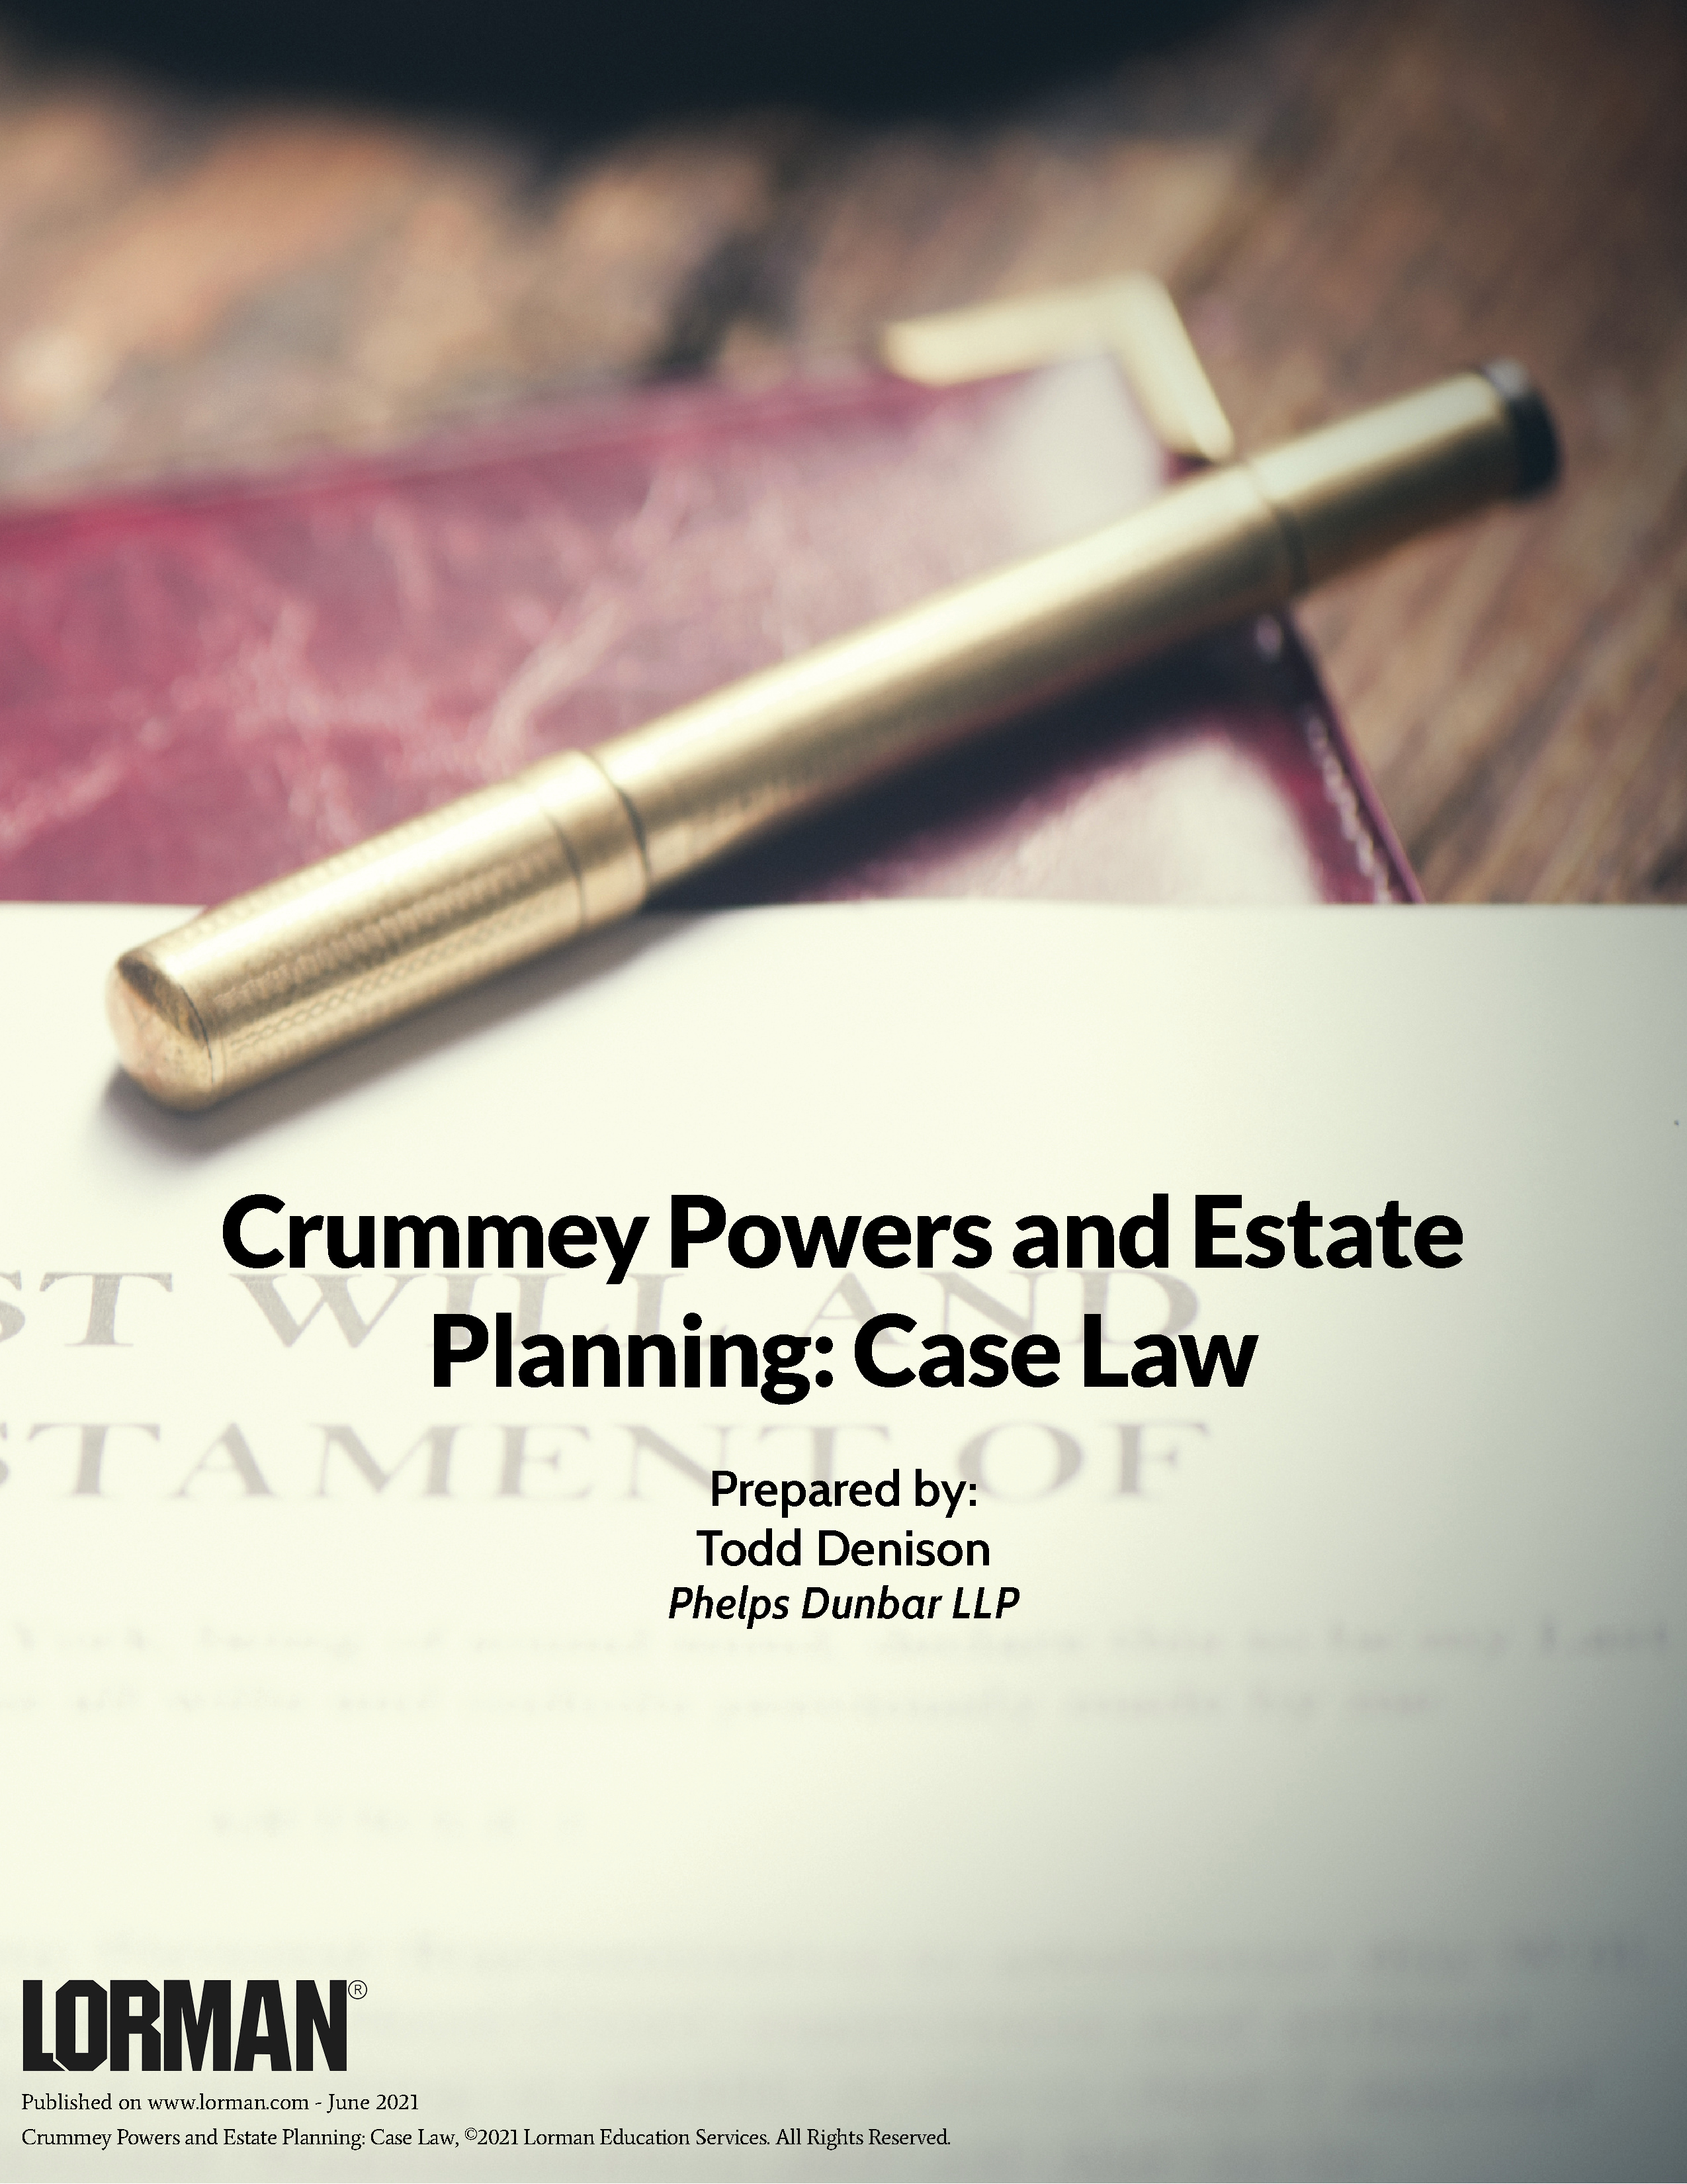 Crummey Powers and Estate Planning: Case Law